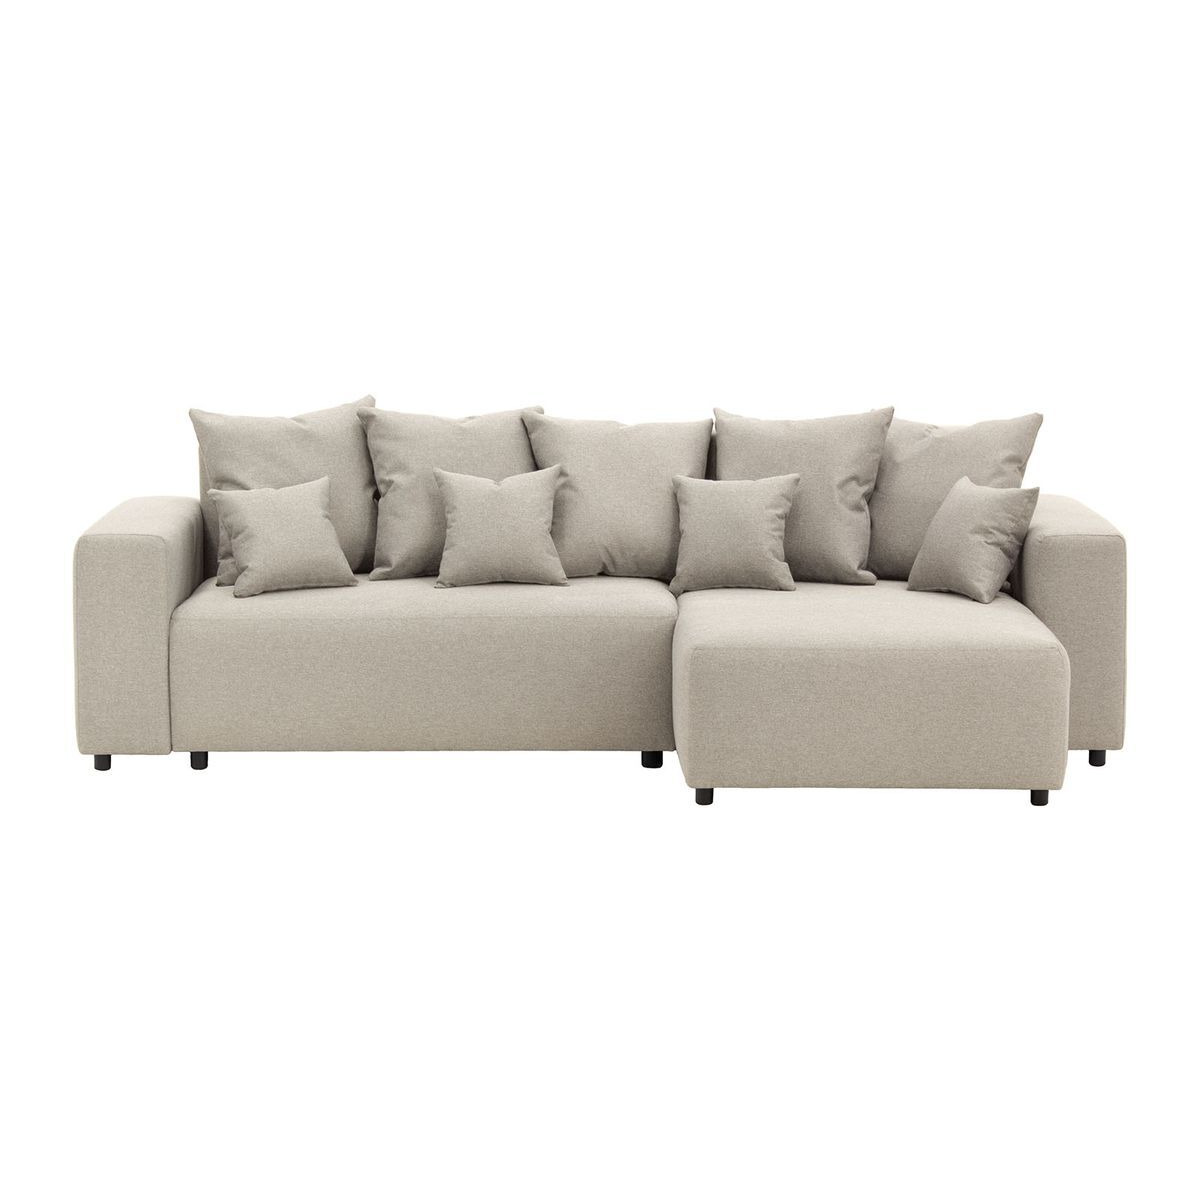 Homely Right Hand Corner Sofa Bed, mustard - image 1